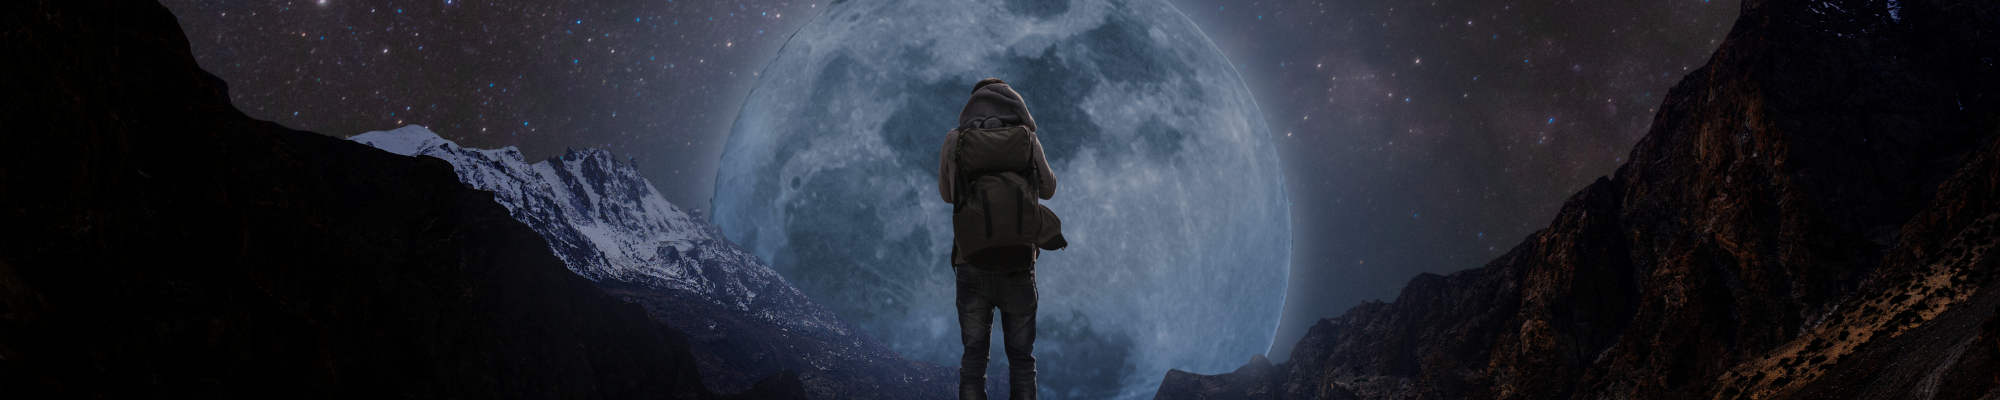 Image of a person with walking toward a full moon with mountains on either side.